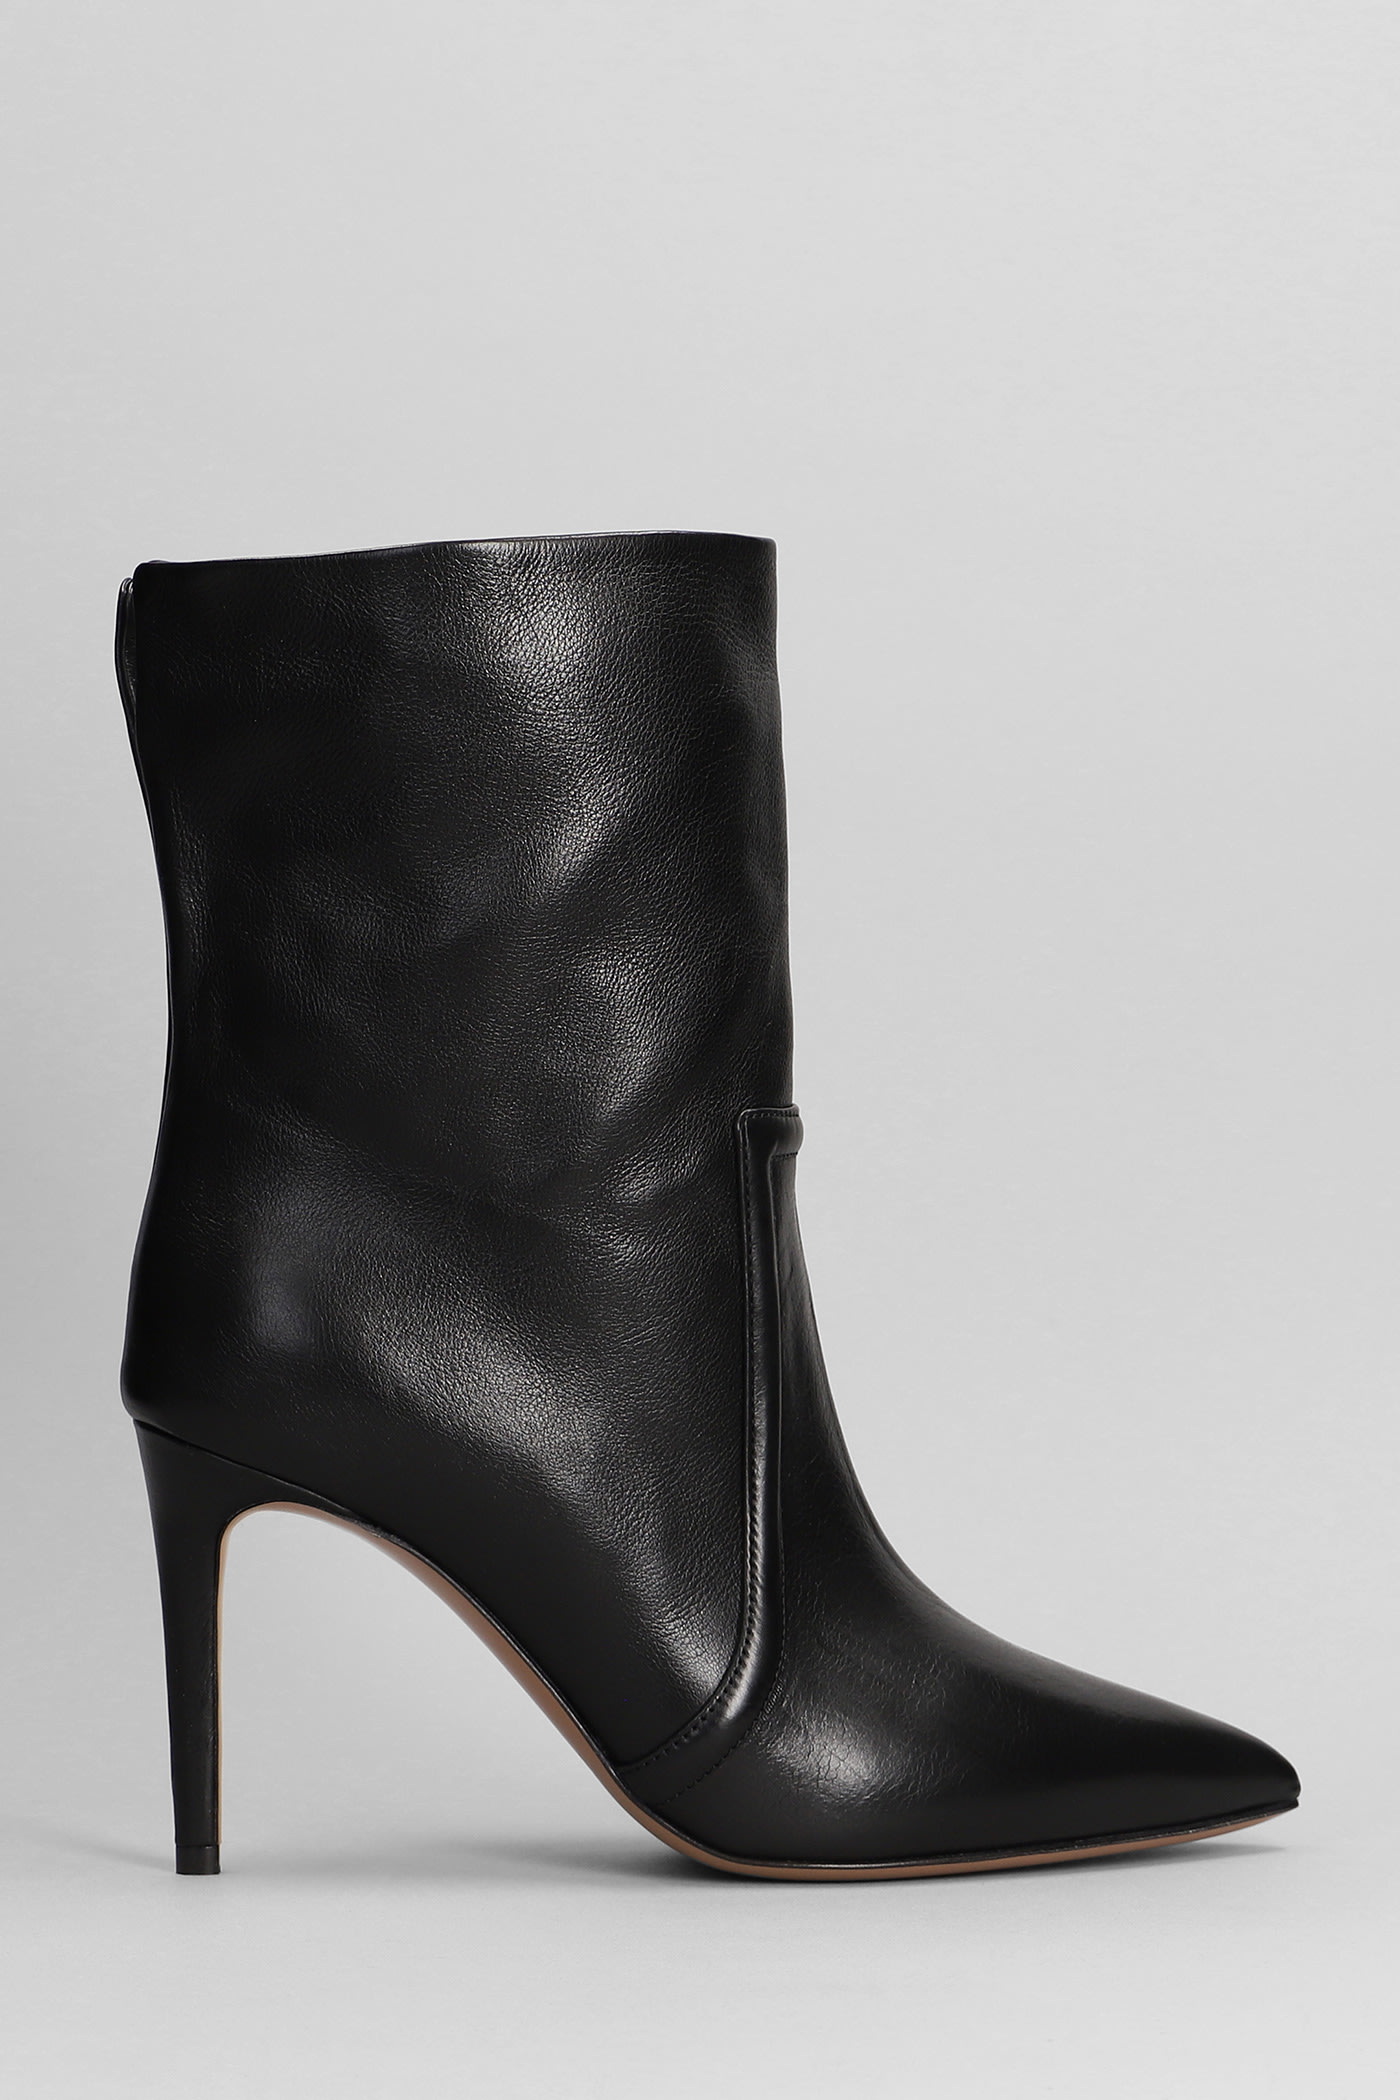 Paris Texas High Heels Ankle Boots In Black Leather